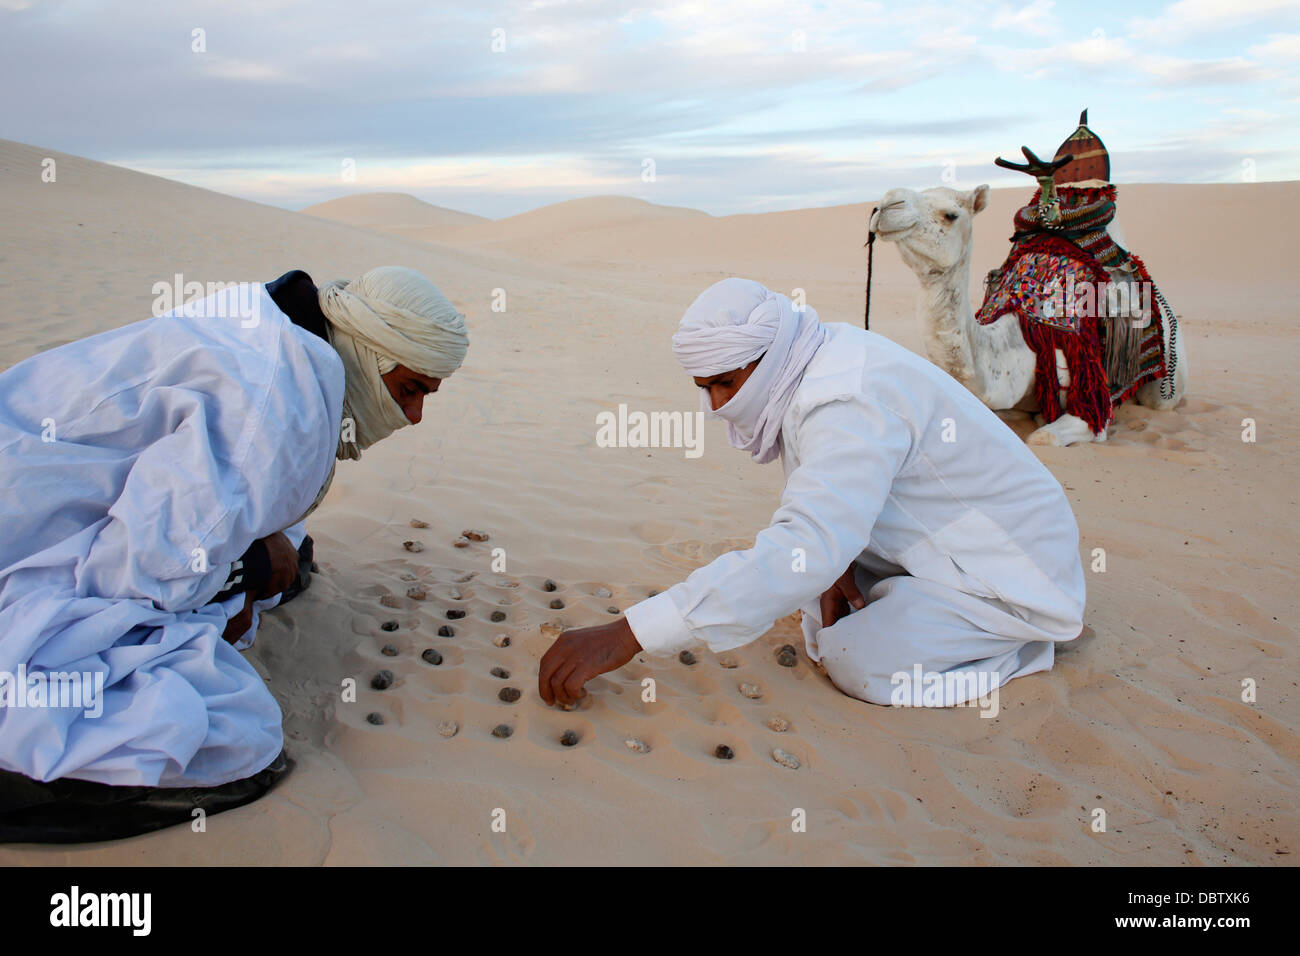 Bedouins playing with stones in the sand, Douz, Kebili, Tunisia, North Africa, Africa Stock Photo